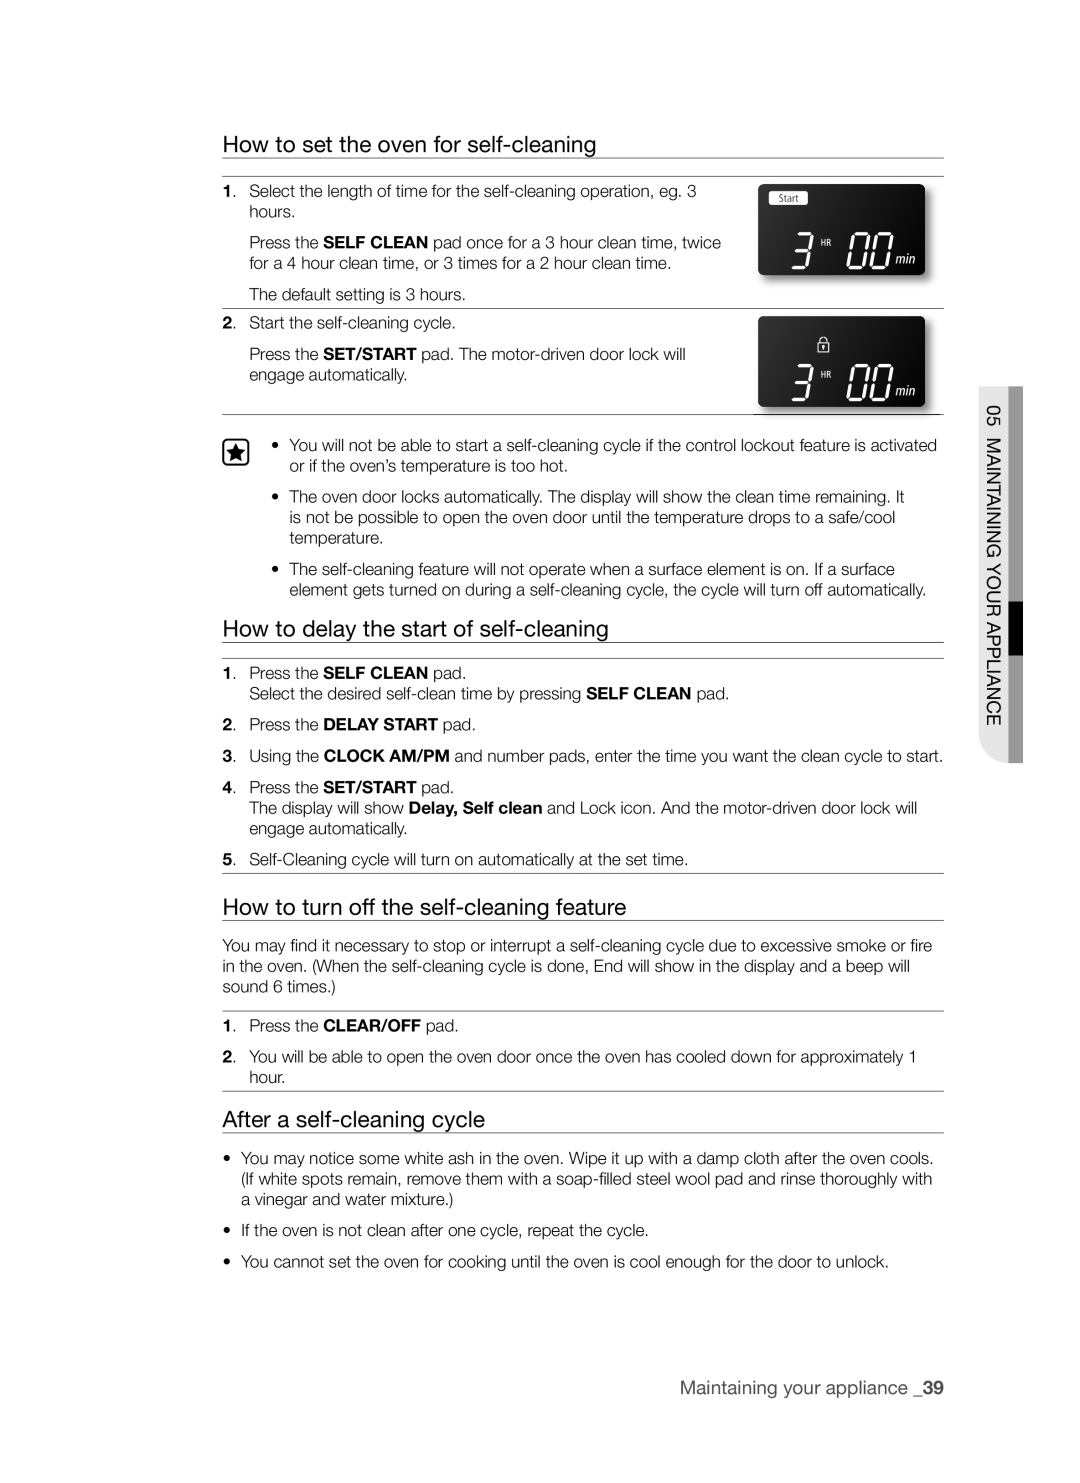 Samsung FTQ352IWB, FTQ352IWW user manual How to set the oven for self-cleaning, How to delay the start of self-cleaning 